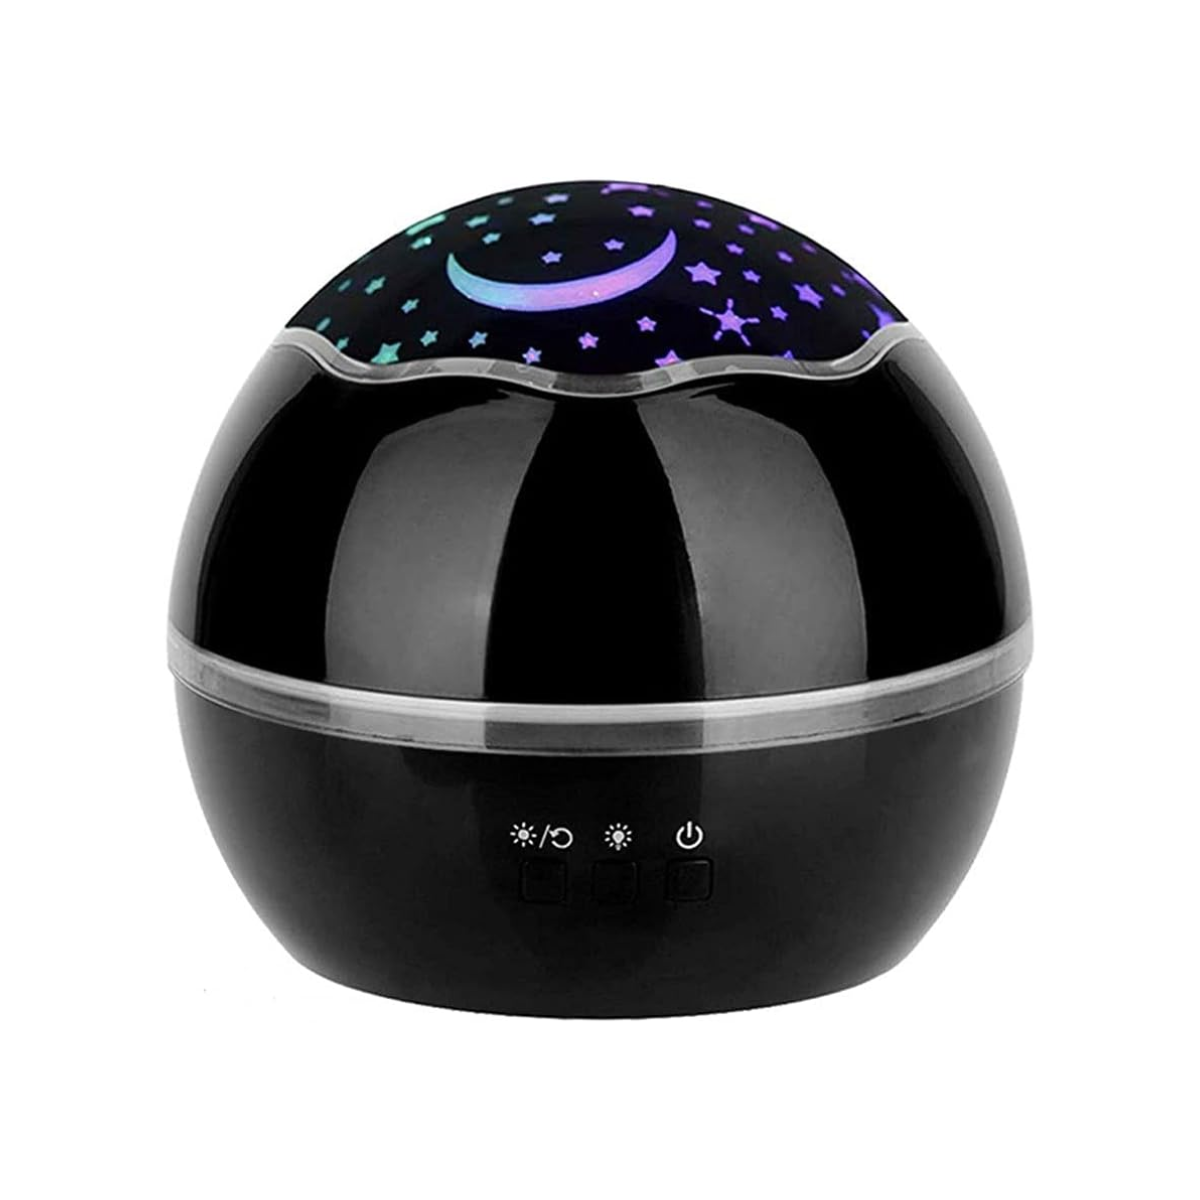 35. Illuminate Your Love: Experience Magic with the Starry Night Sky Projector